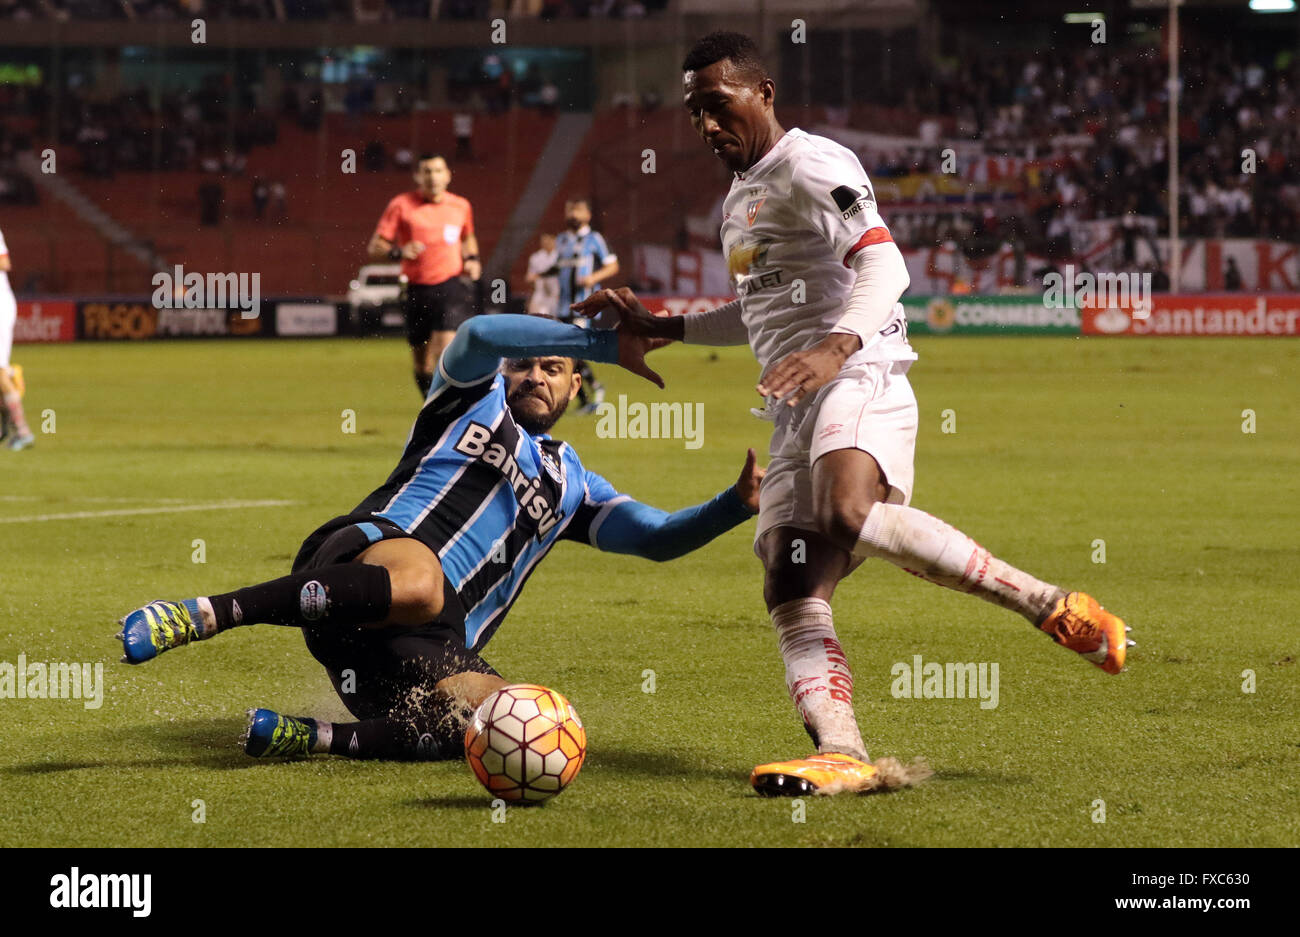 Quito, Ecuador. 13th Apr, 2016. Julio Ayovi (R) of Ecuador's Liga Sports University vies with Douglas of Brazil's Gremio during the match of the group stage of the Libertadores Cup at Casa Blanca, in Quito, Ecuador, on April 13, 2016. Brazil's Gremio won 3-2. © Santiago Armas/Xinhua/Alamy Live News Stock Photo